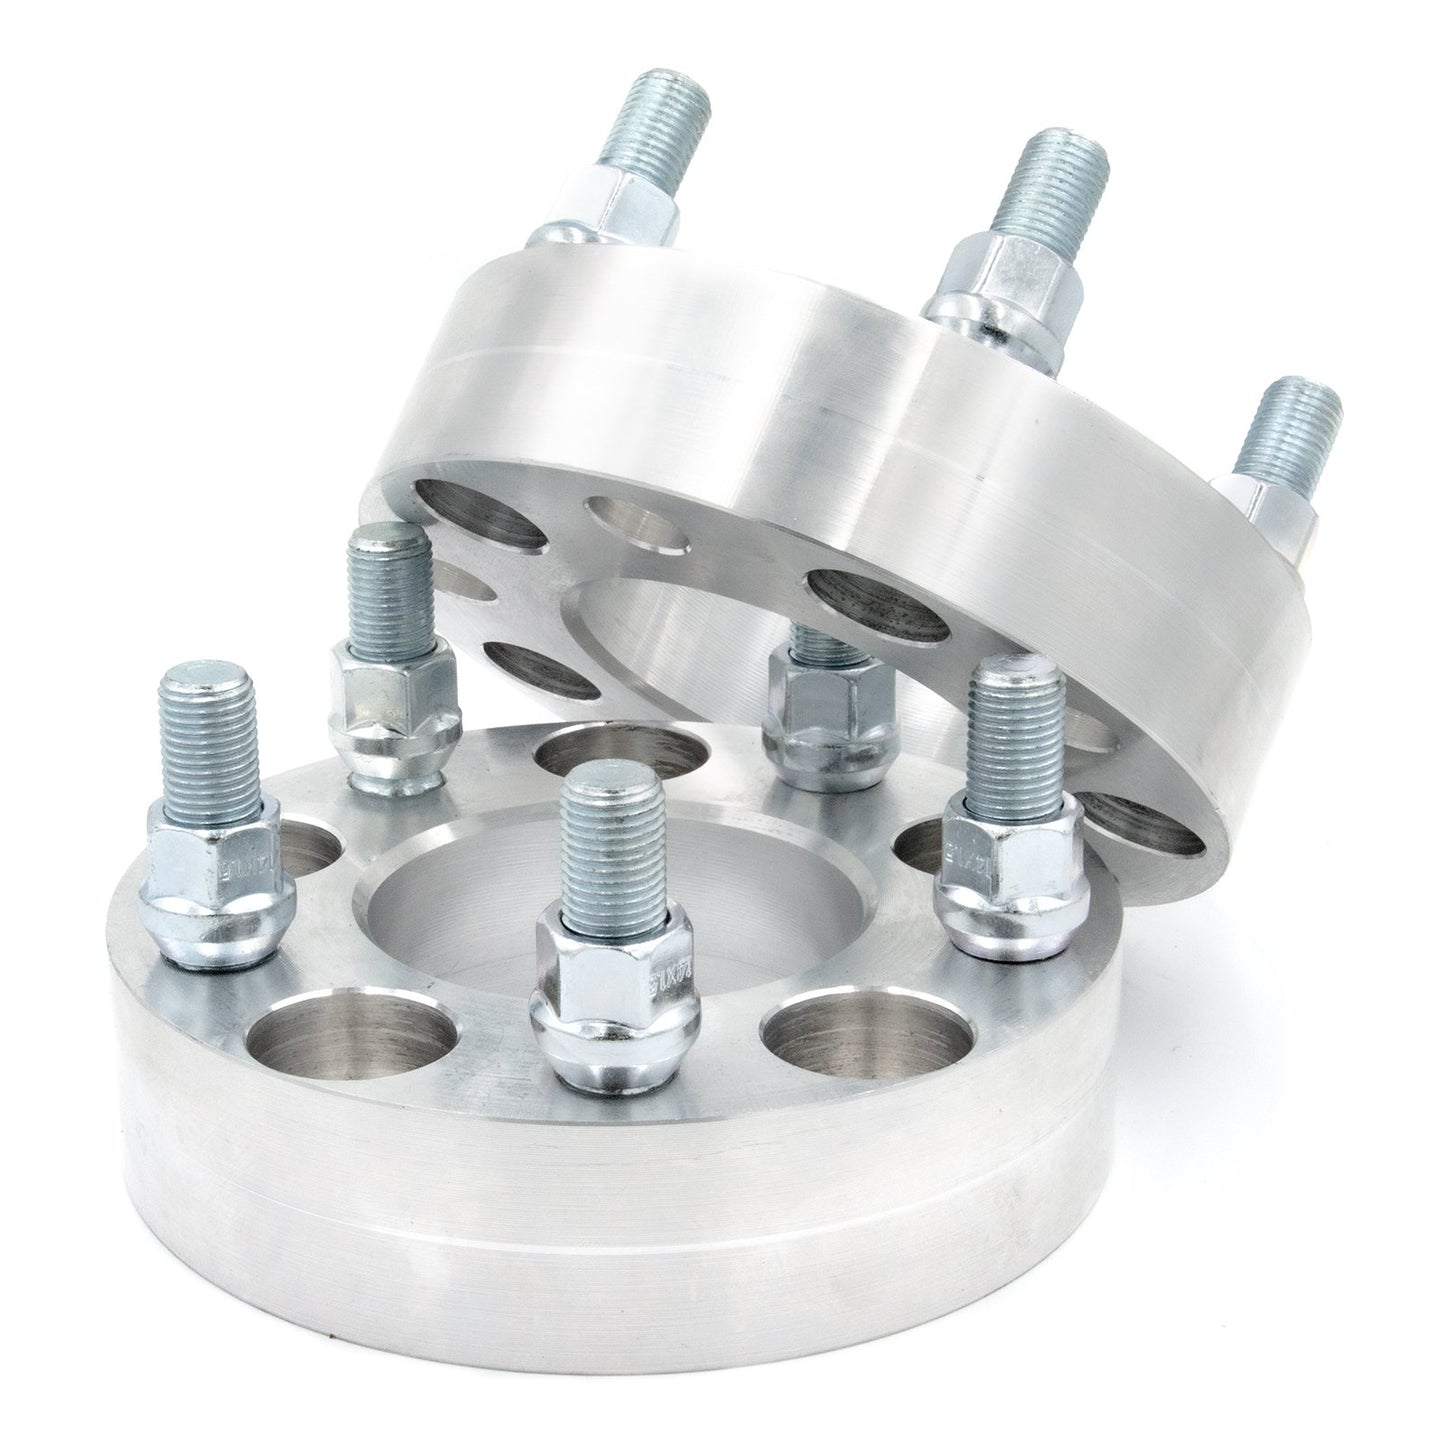 5x98 to 5x110 Wheel Spacer/Adapter - Thickness: 3/4"- 4"